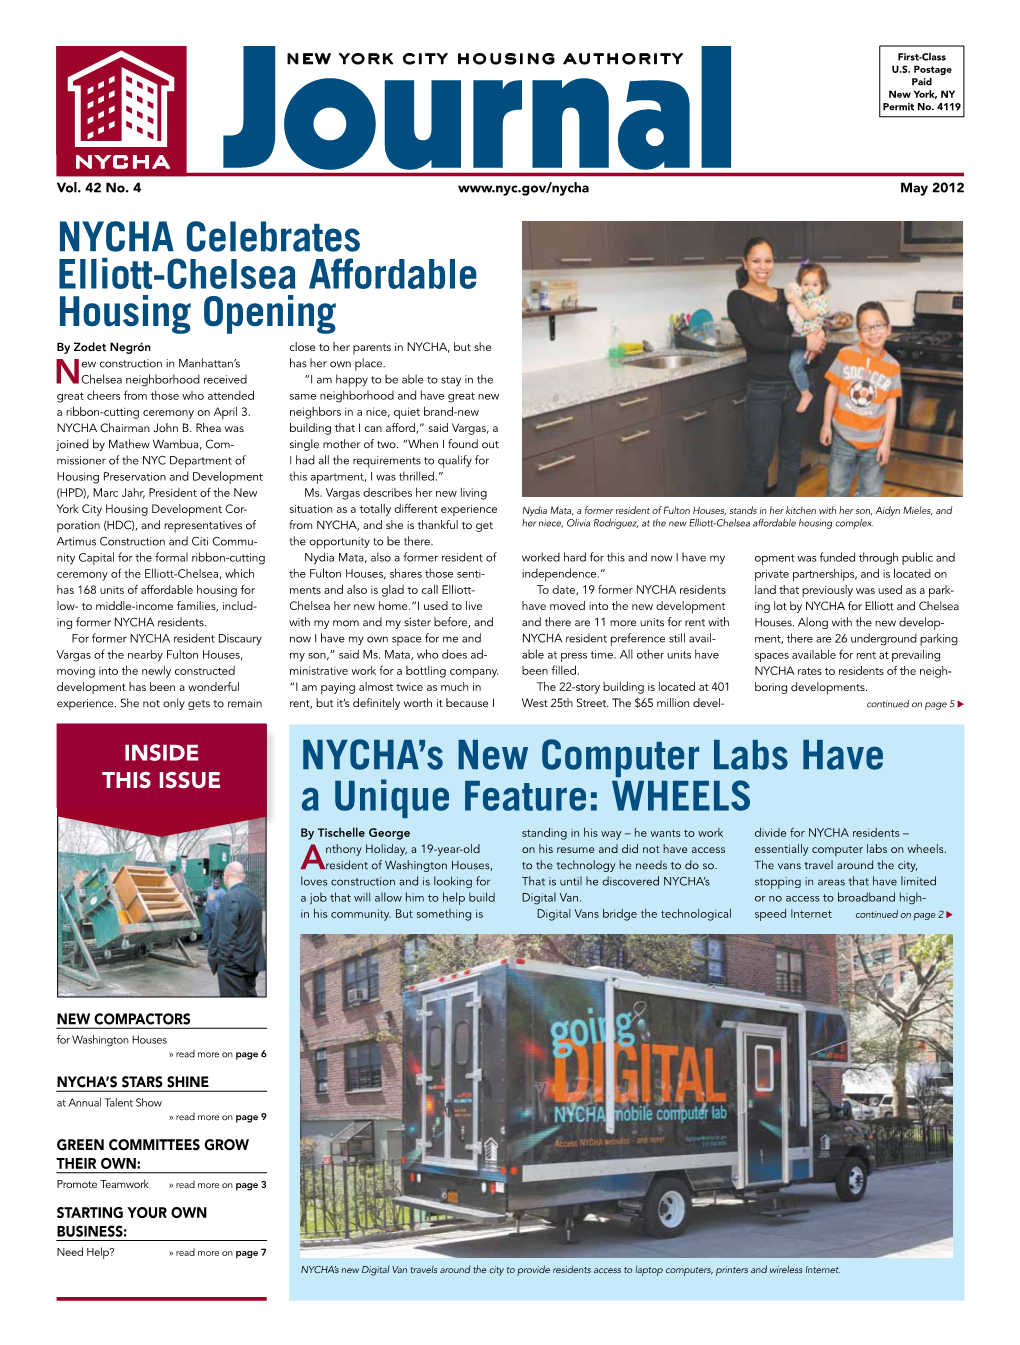 NYCHA Celebrates Elliott-Chelsea Affordable Housing Opening by Zodet Negrón Close to Her Parents in NYCHA, but She Ew Construction in Manhattan’S Has Her Own Place